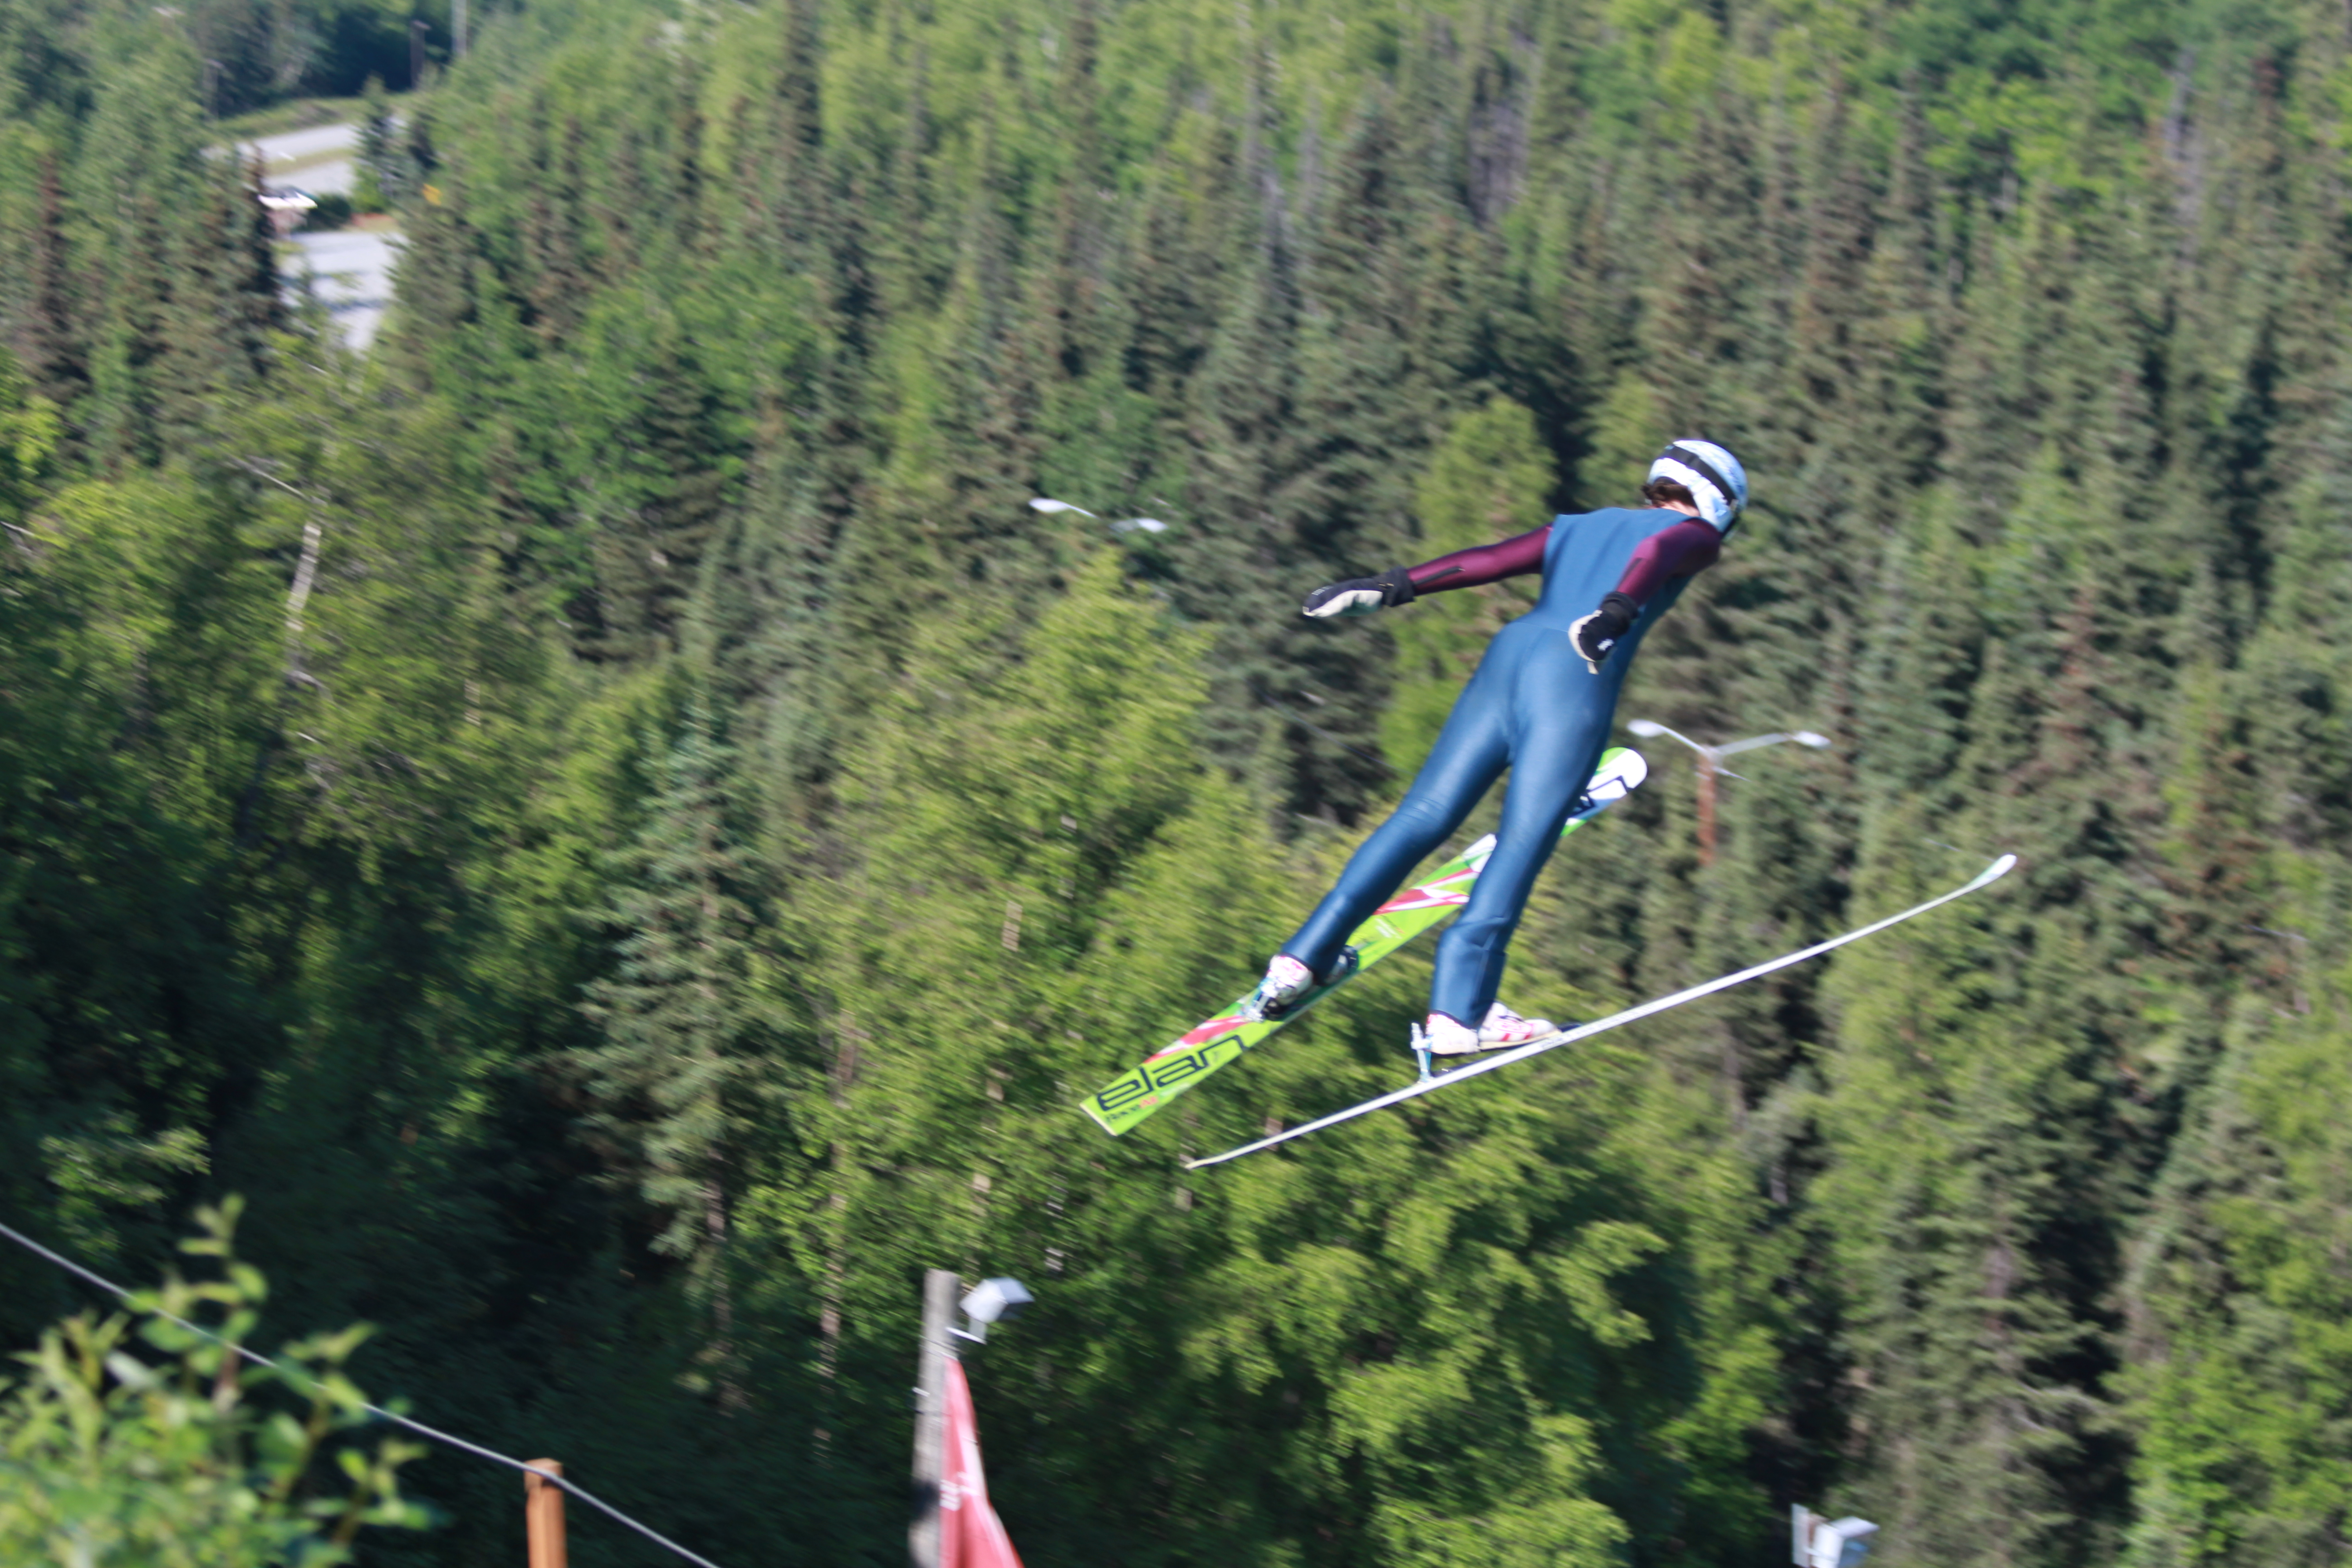 One of the young members of the Nordic Ski Association of Anchorage flies off of one of the new summer ski jumps. The Hilltop ski jump facility is the first of its kind to allow for ski jumping in the summer in Alaska. (Photo by Wesley Early, Alaska Public Media - Anchorage)